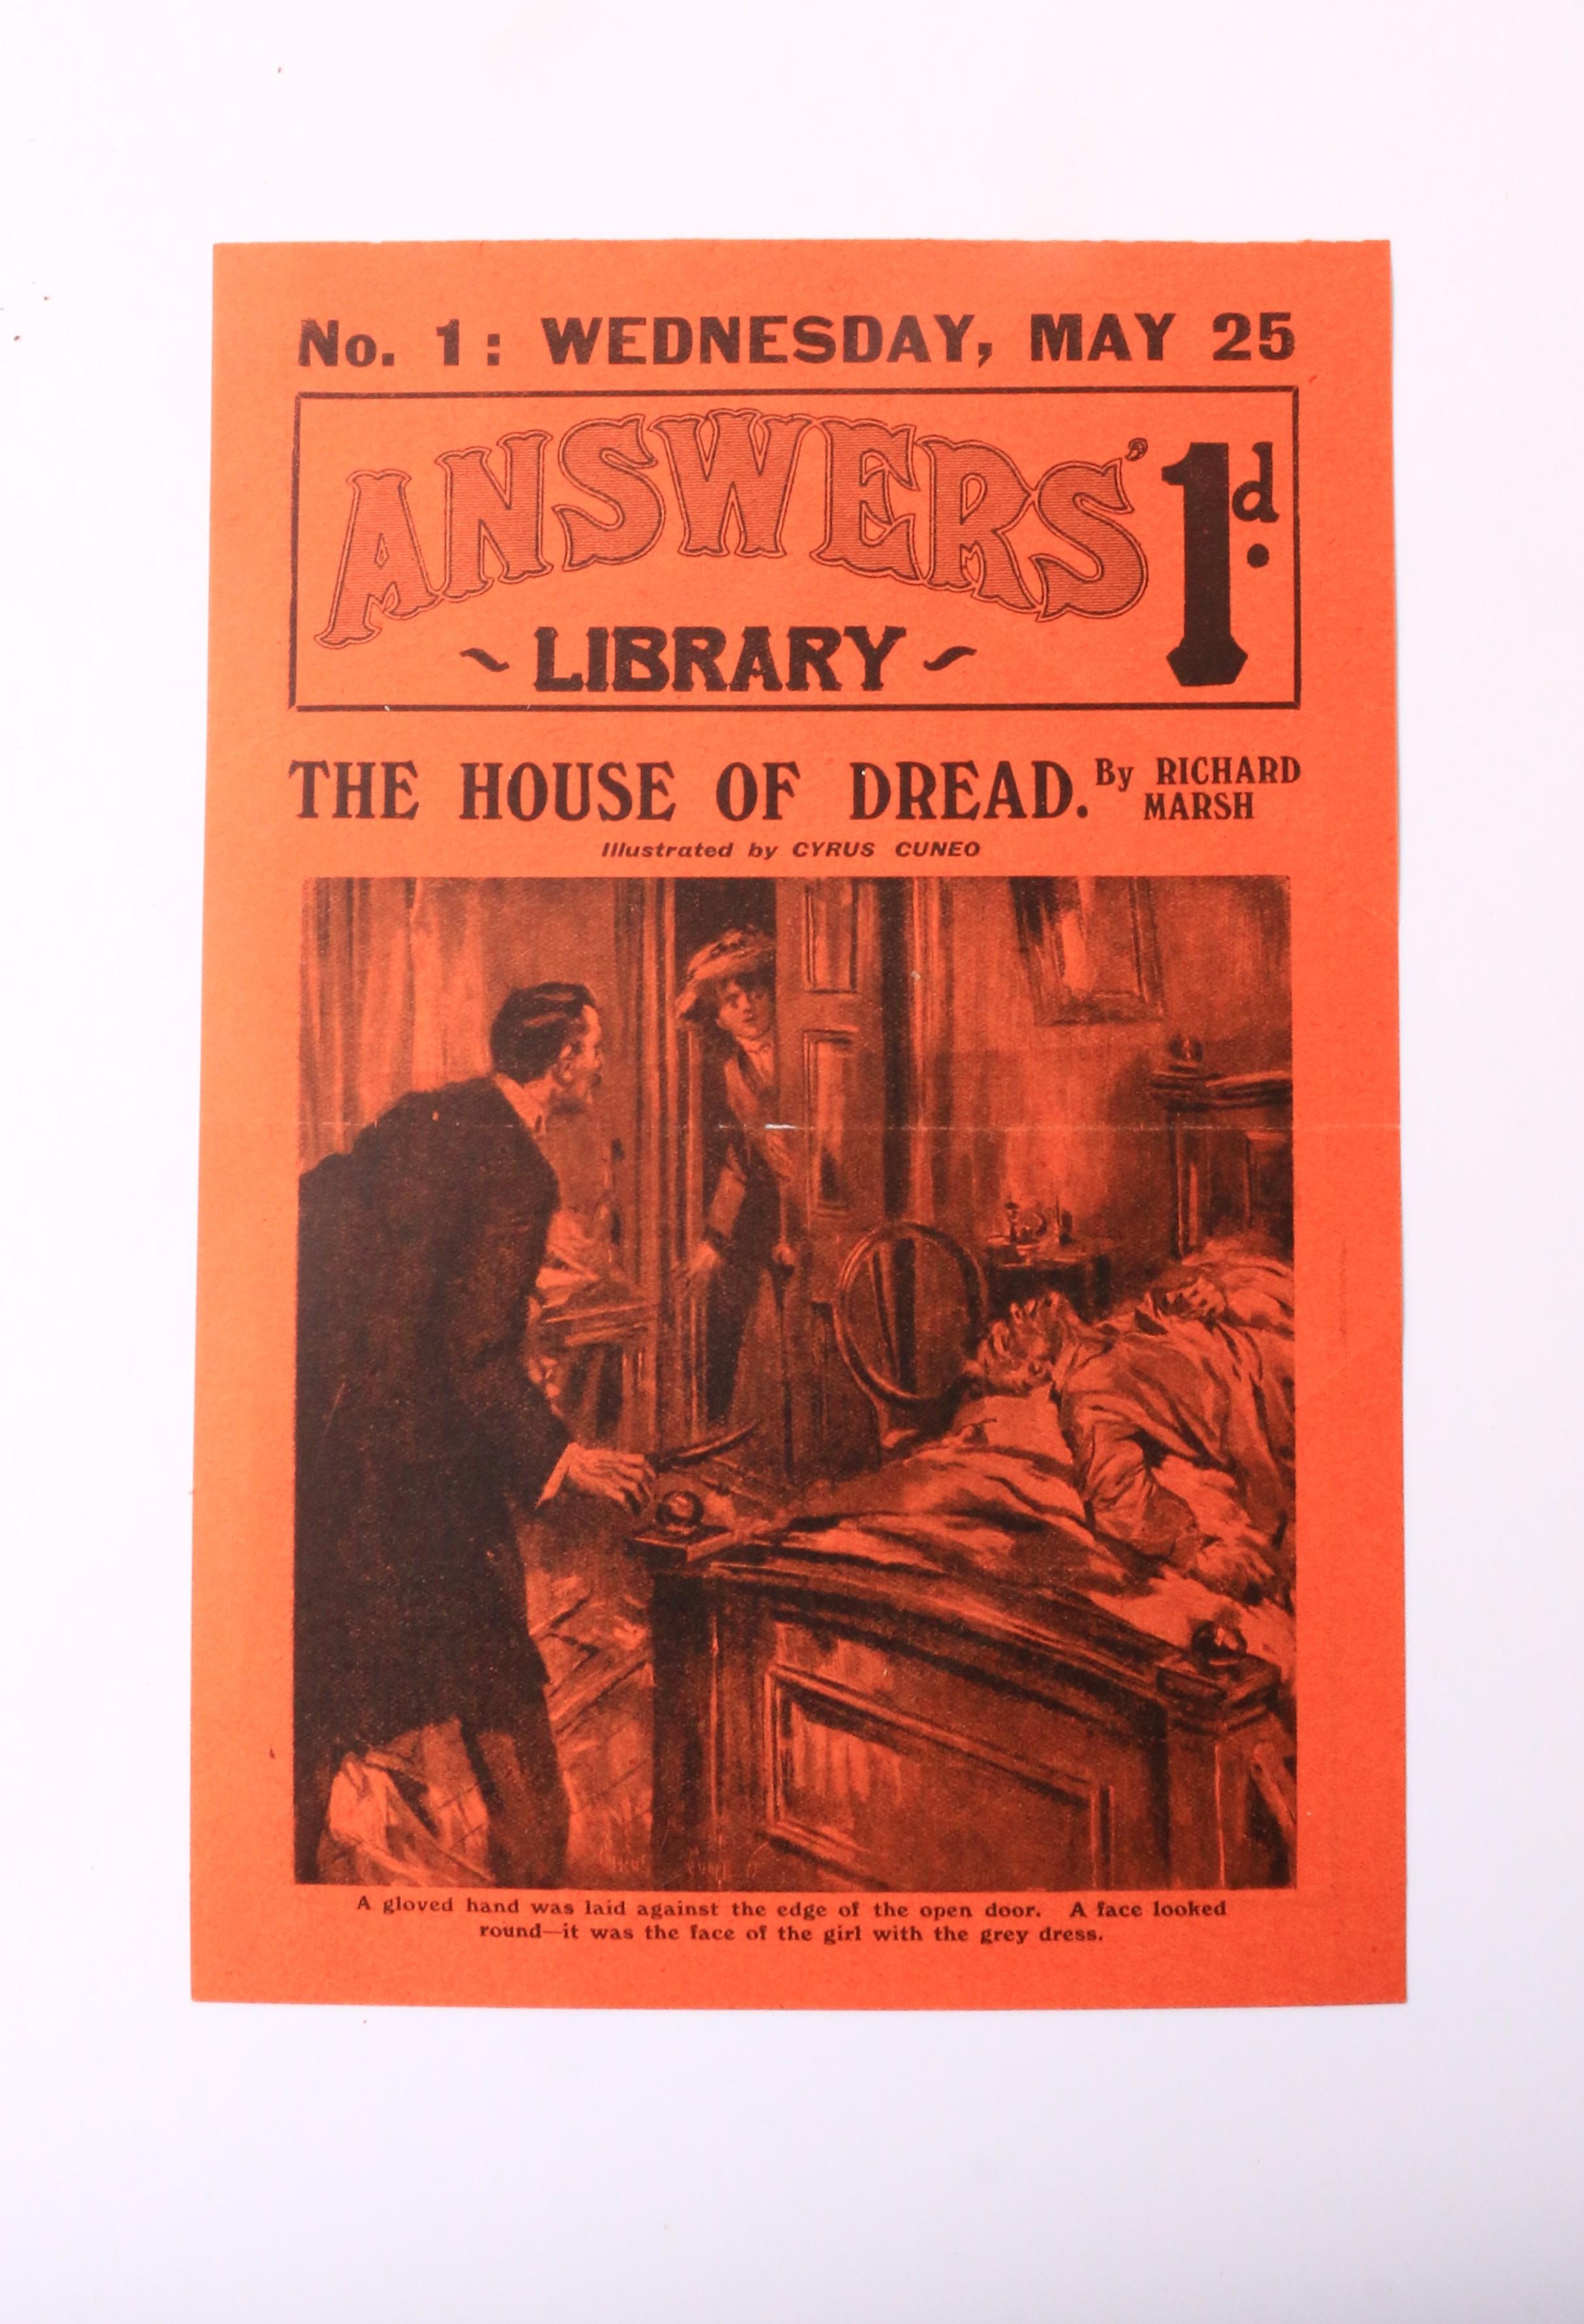 Richard Marsh - The House of Dread Flyer[?] - Answers Library, n.d., .